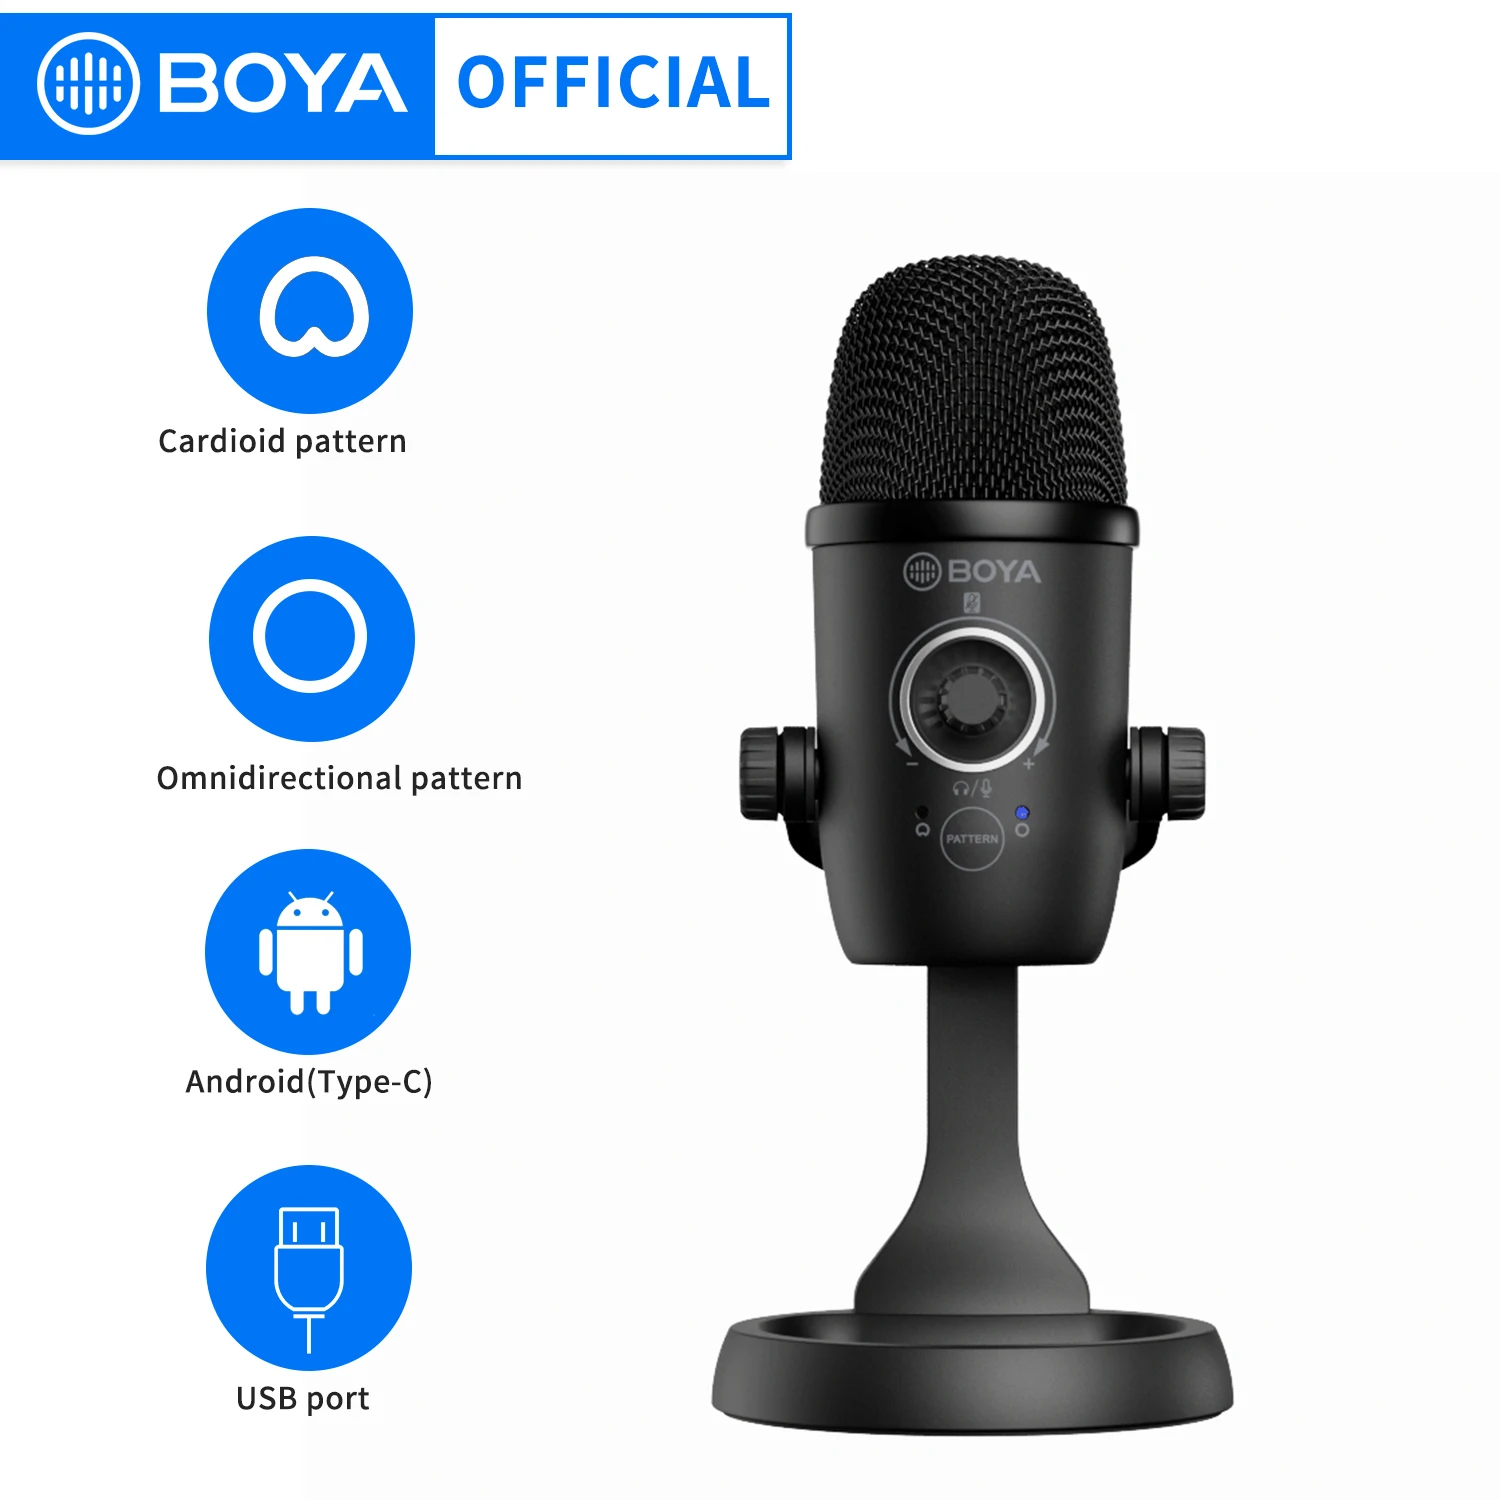 Enlarge BOYA USB Condenser Recording Microphone BY-CM5 Tabletop Real-Time Studio Video Mic for PC iPhone Youtube Livestream Game Podcast